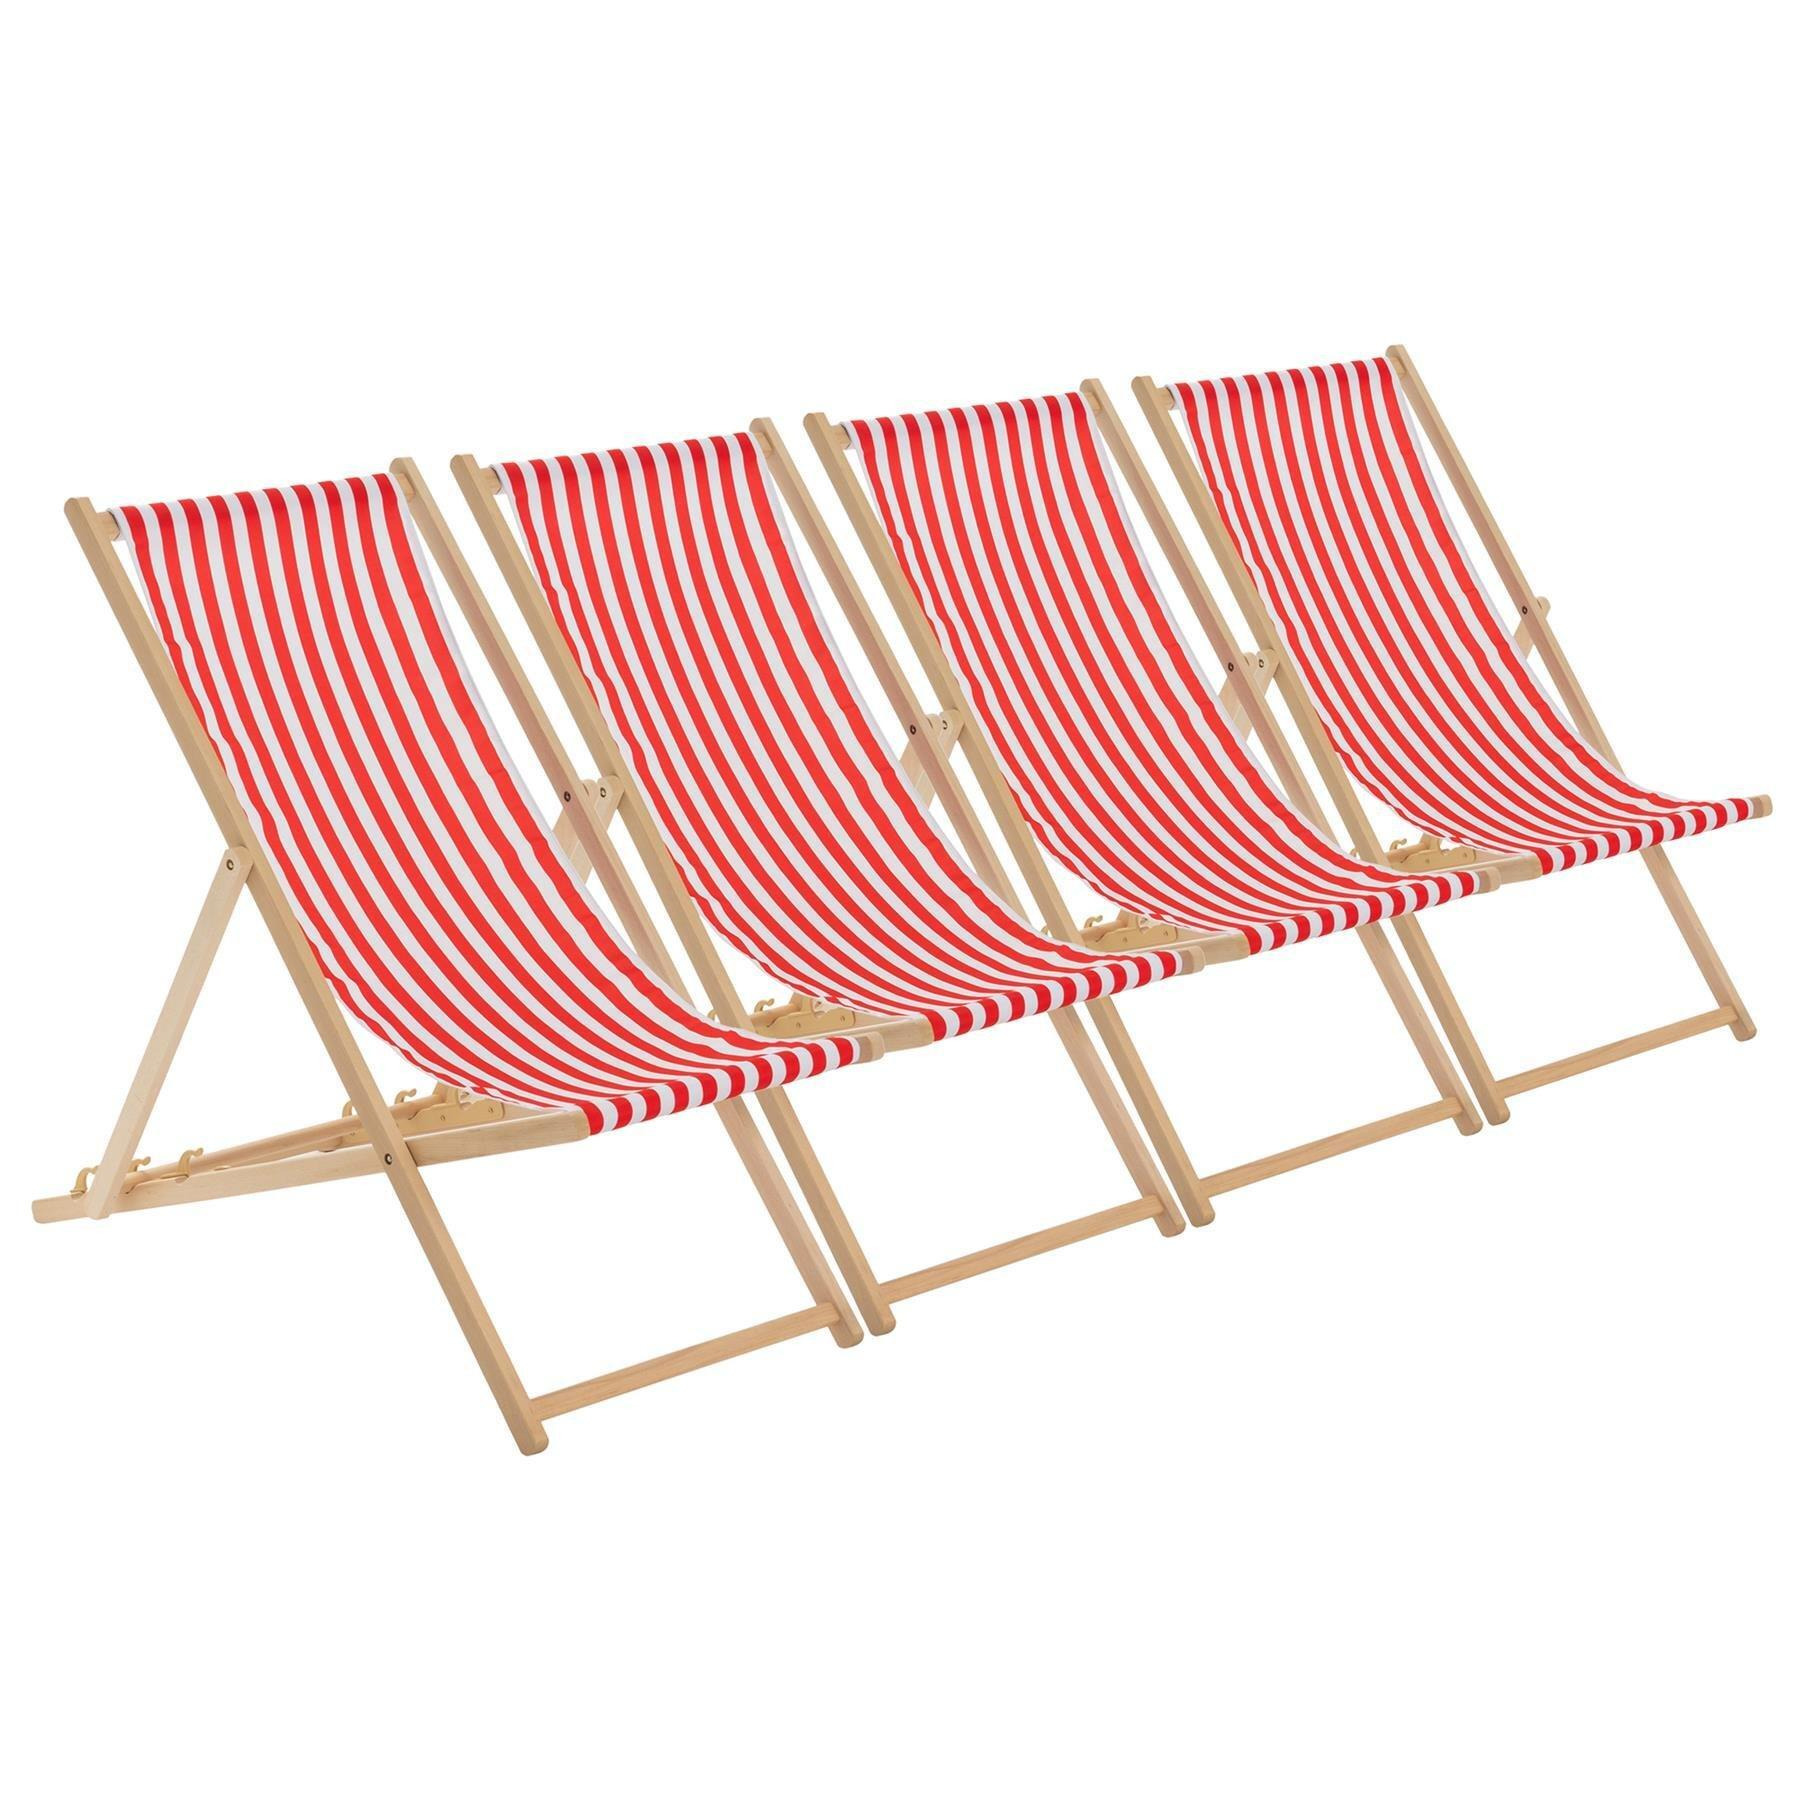 Folding Wooden Deck Chairs Red Stripe Pack of 4 - image 1